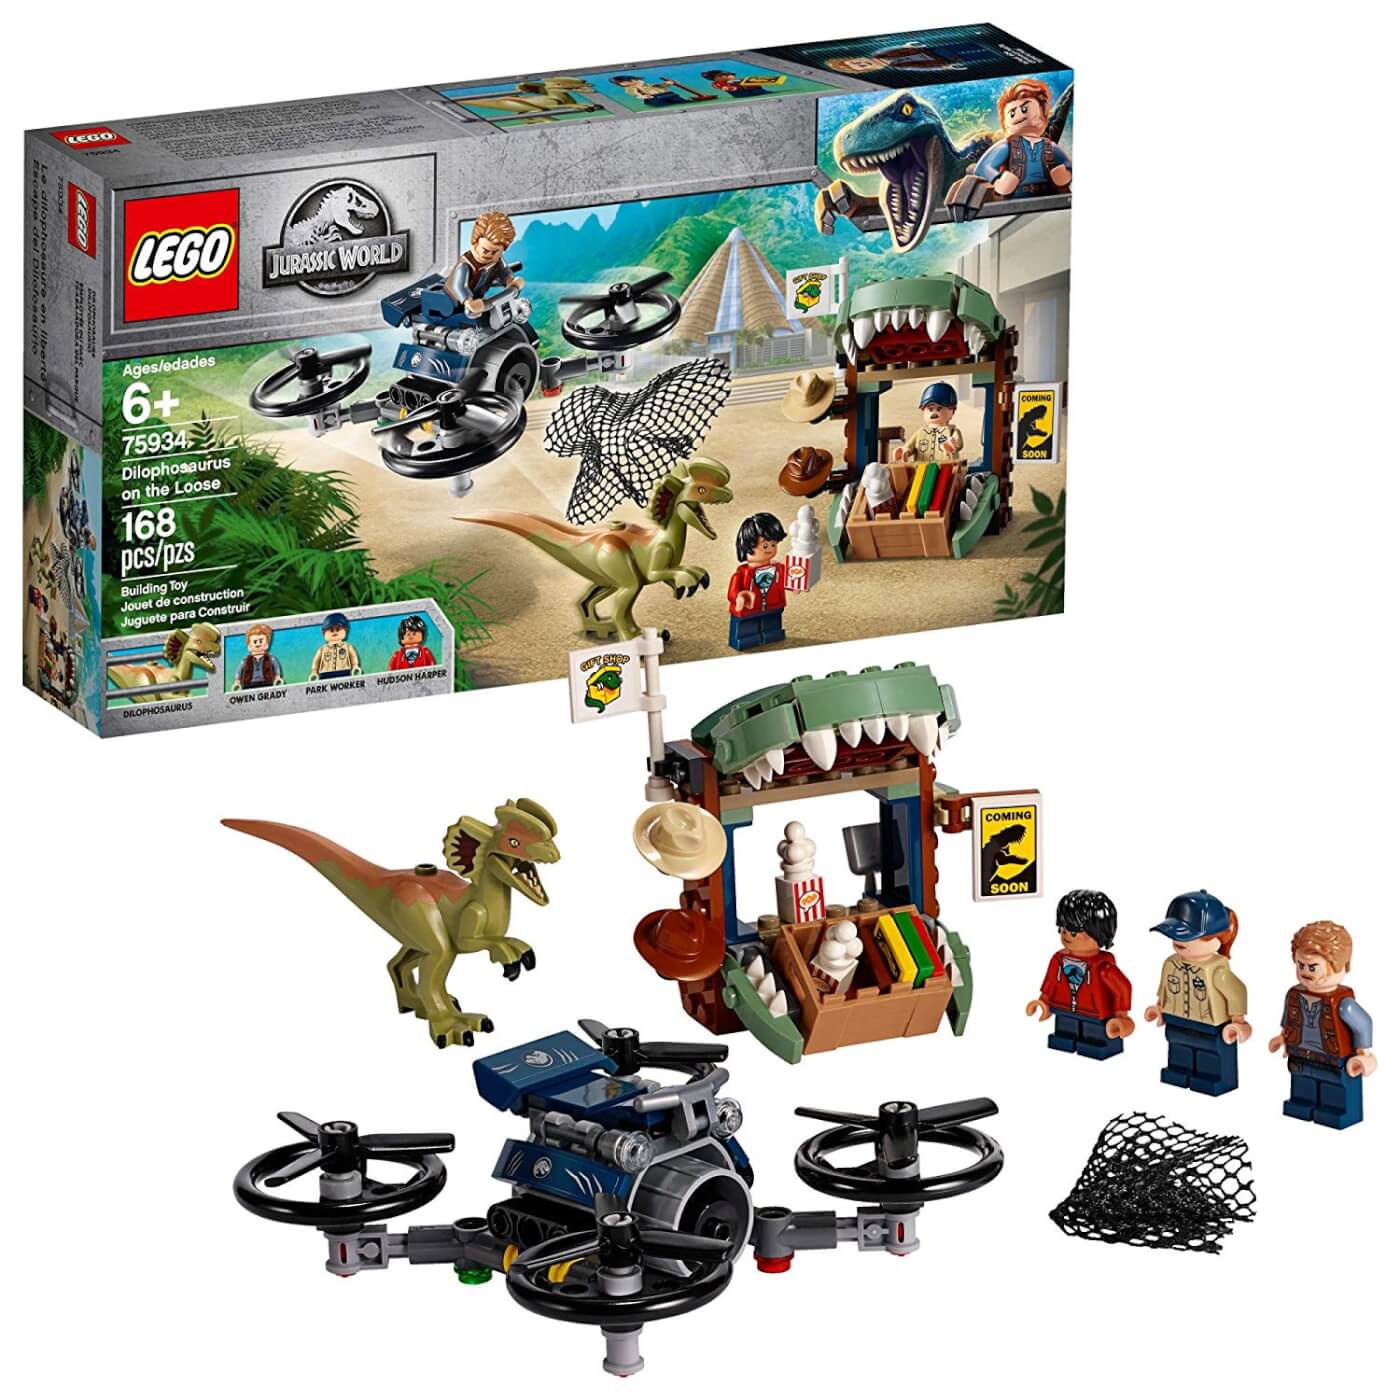 new lego sets in 2019